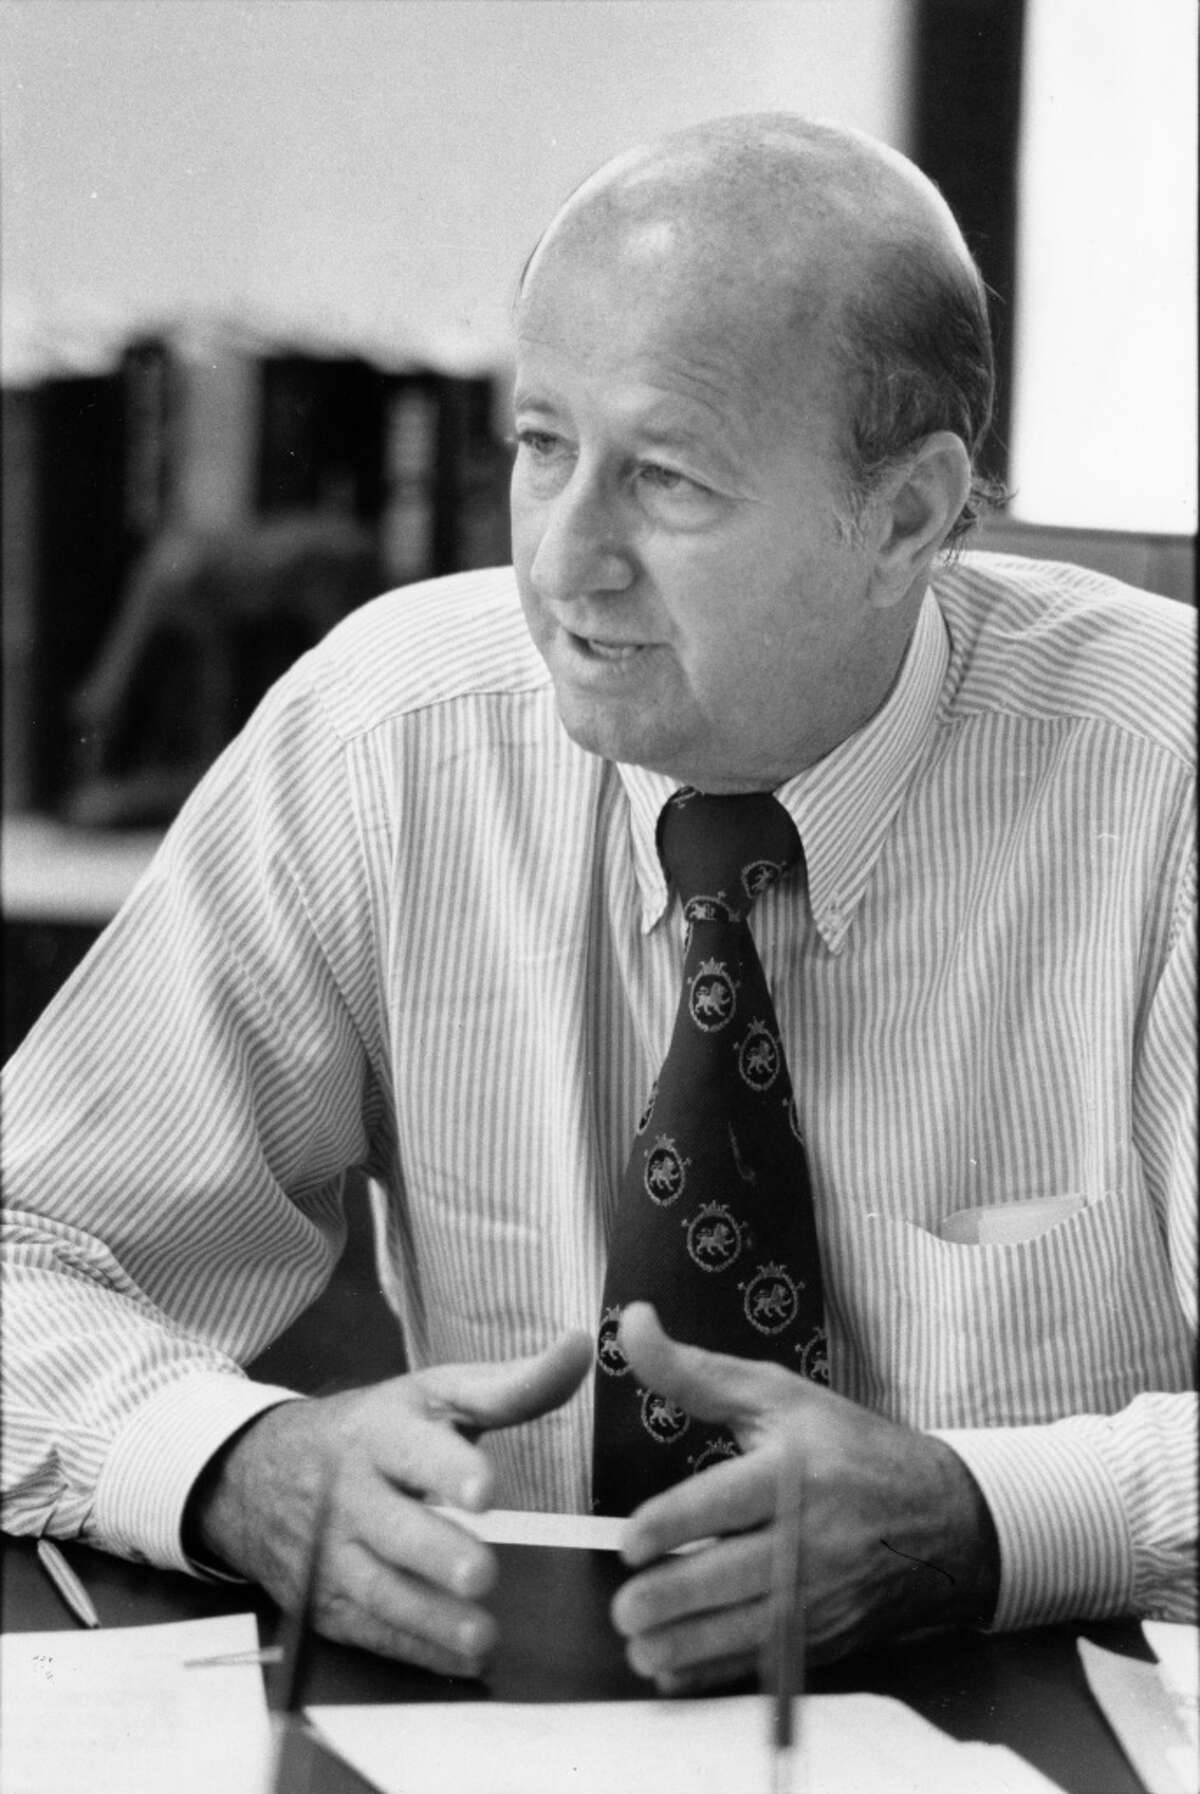 Oil man and real estate developer George P. Mitchell in his office in November 1979.